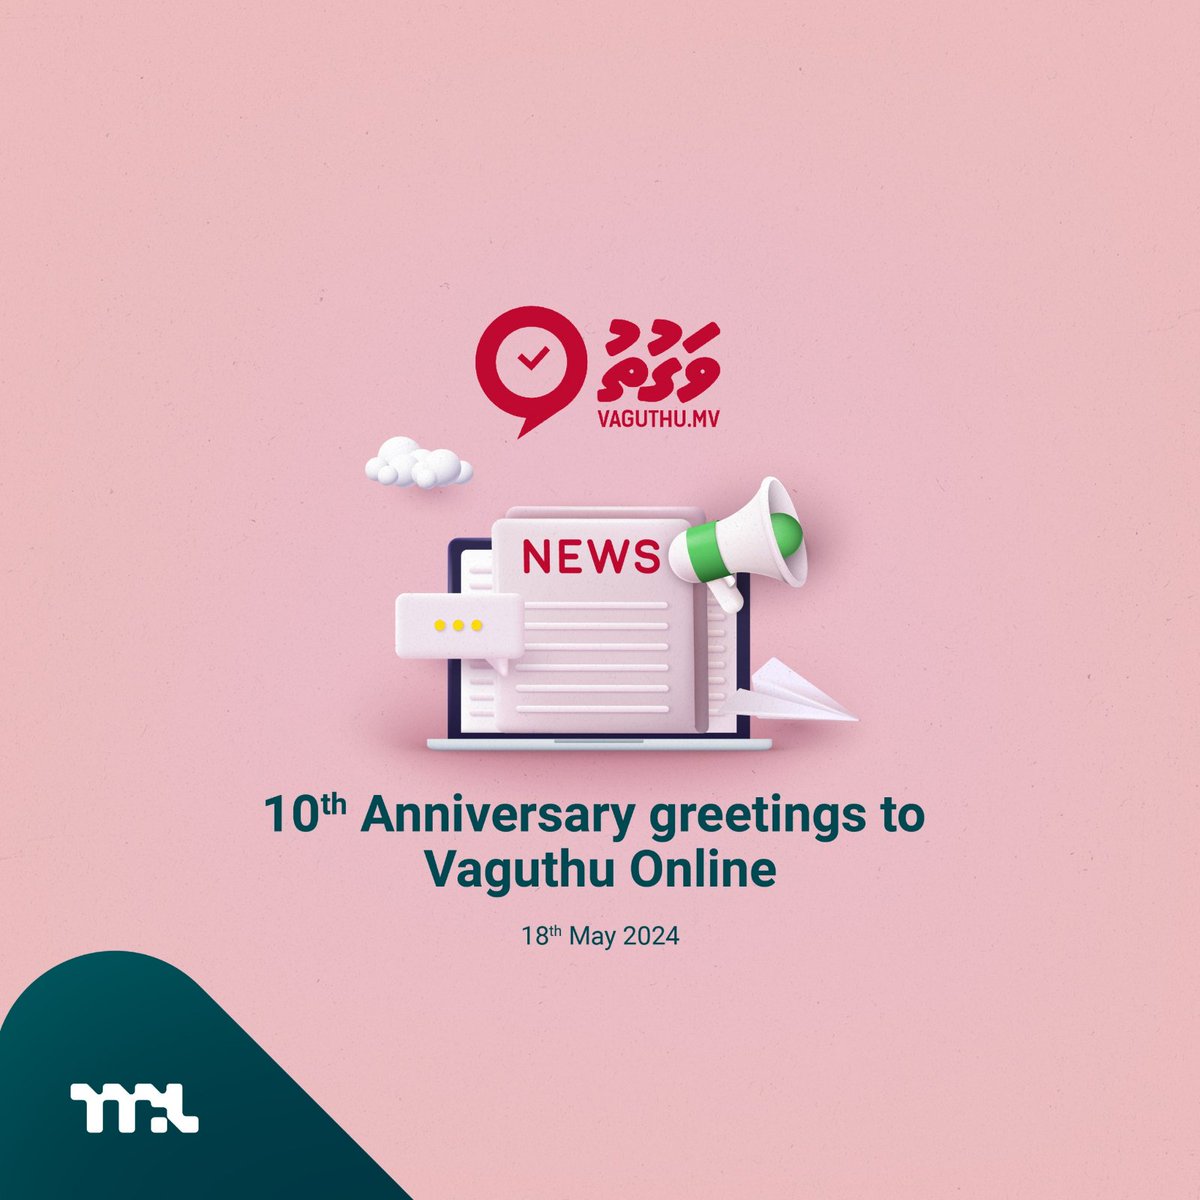 Congratulations and best wishes to @VaguthuOnline on their 10th anniversary.